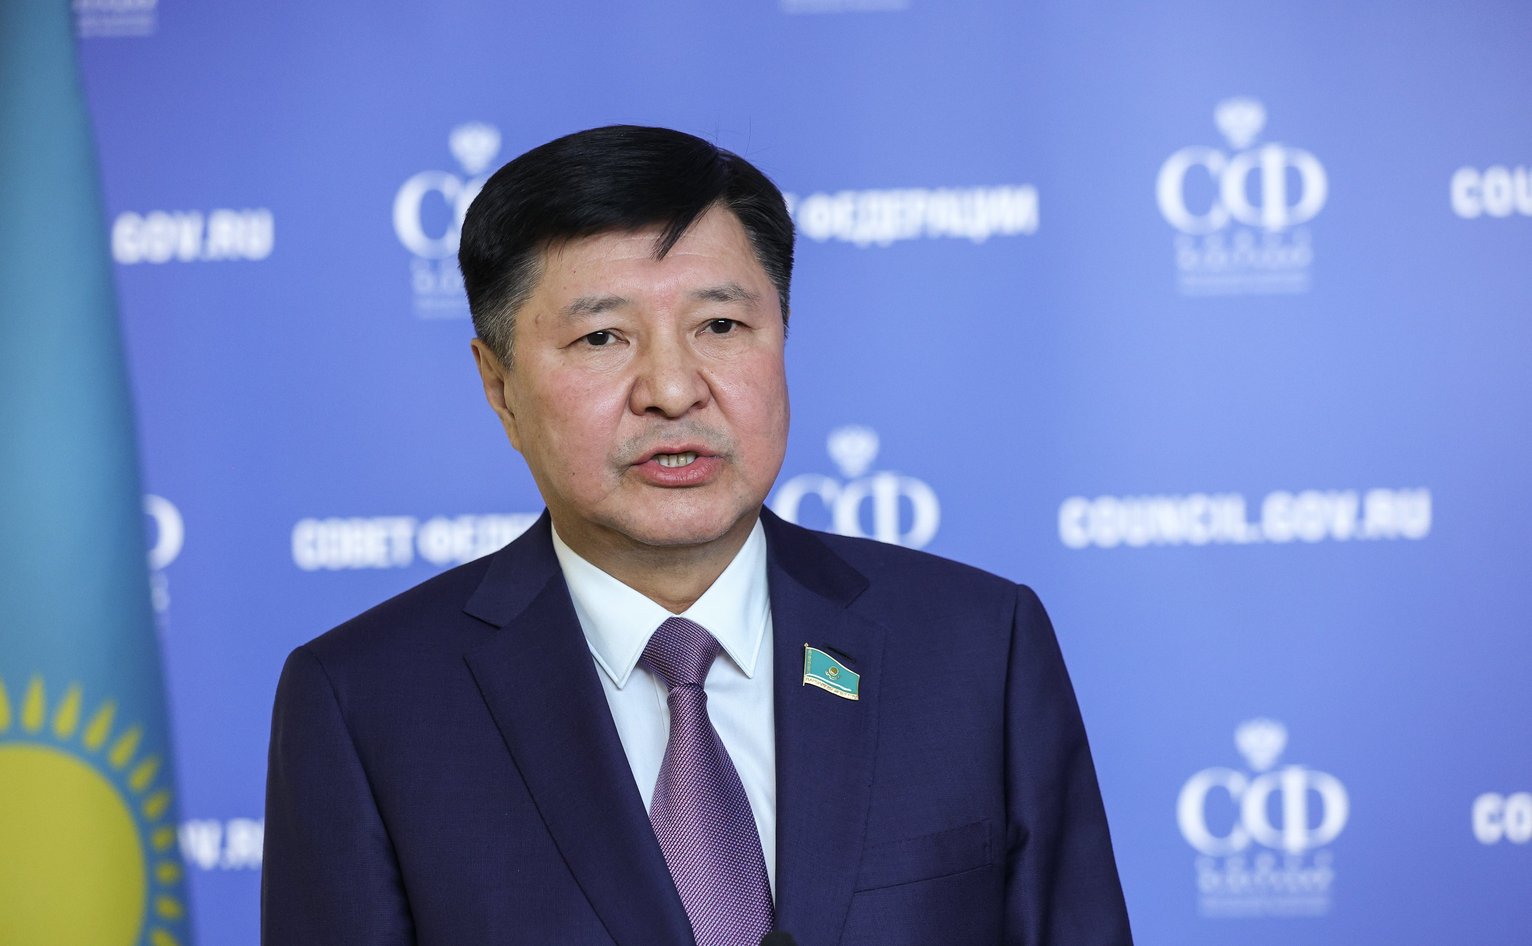 Kazakhstan's agrarian science achievements remain only on paper